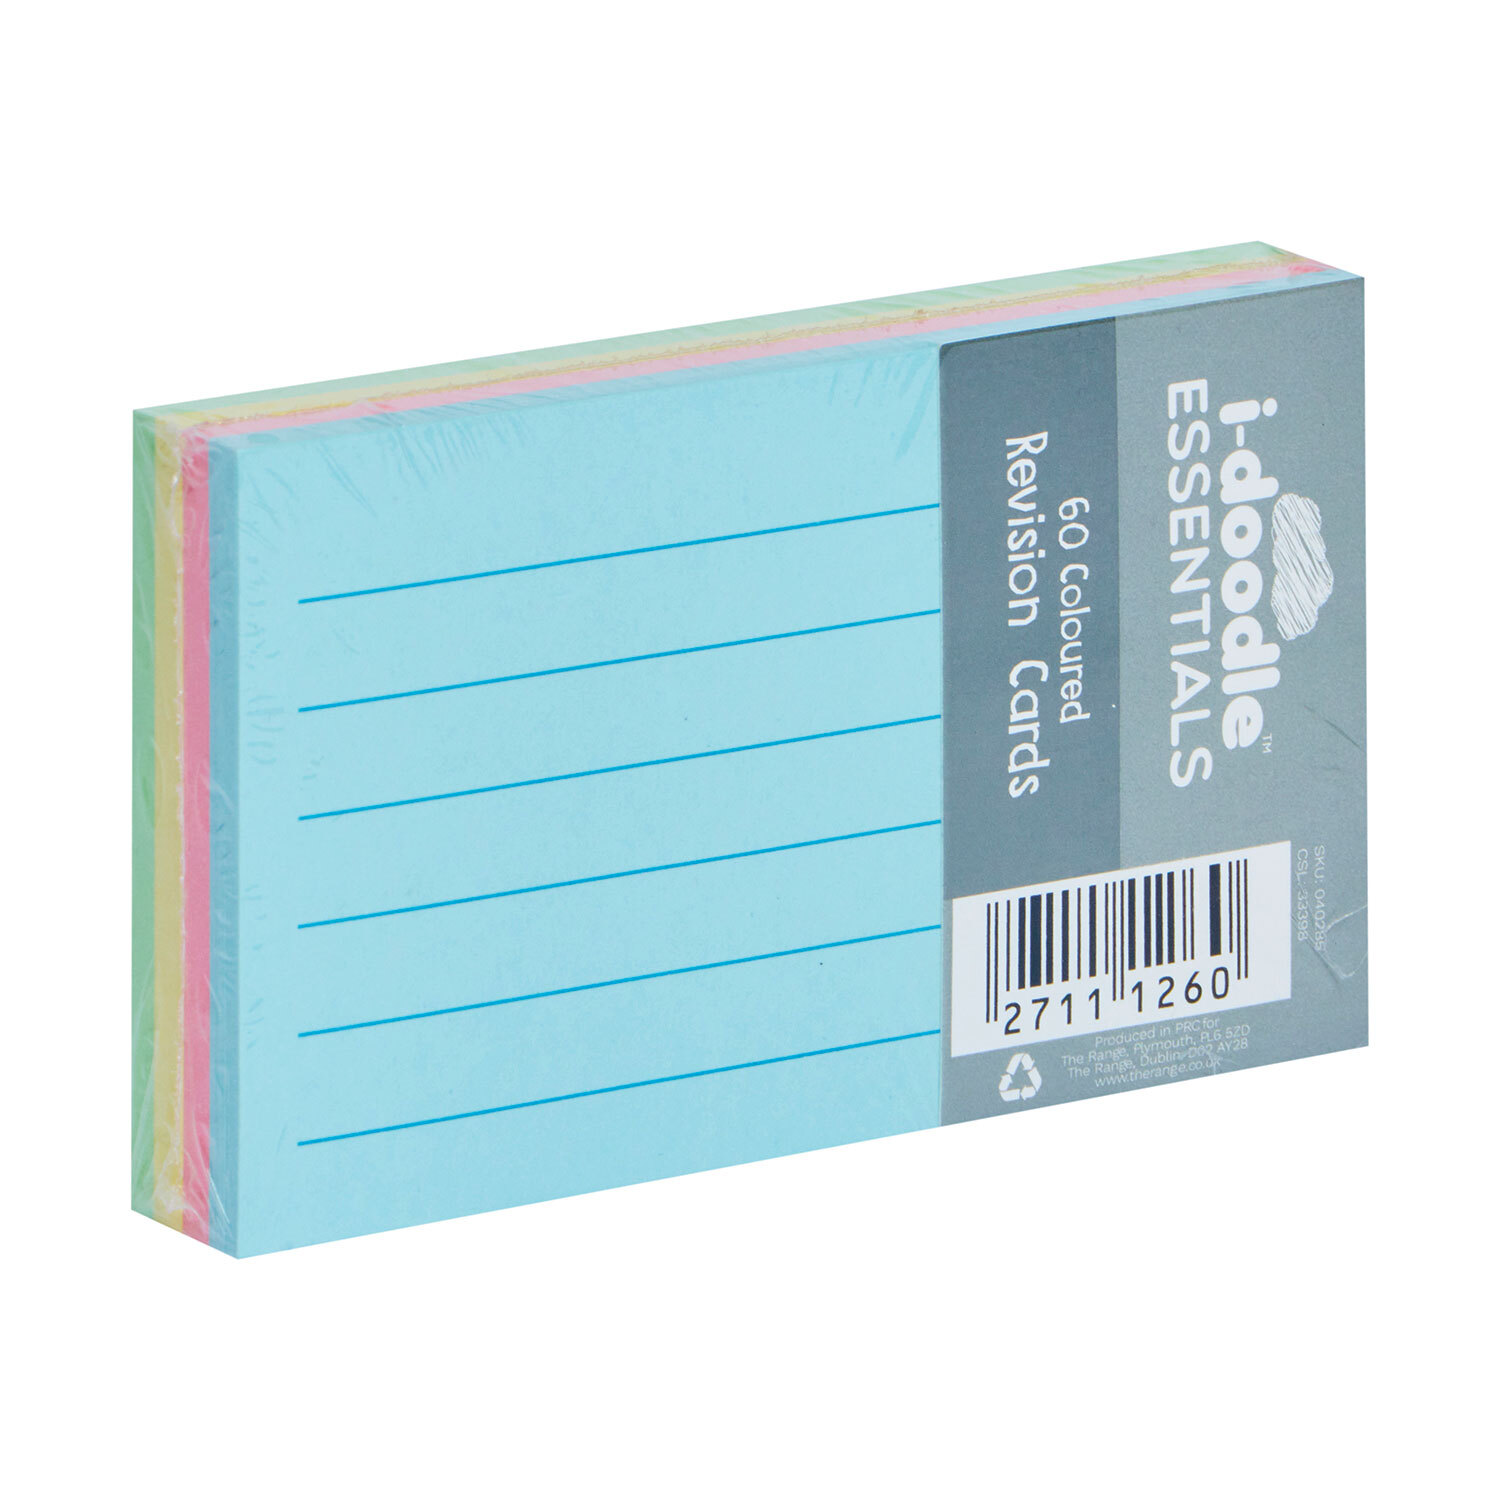 Pack of 60 Revision and Presentation Coloured Cards Image